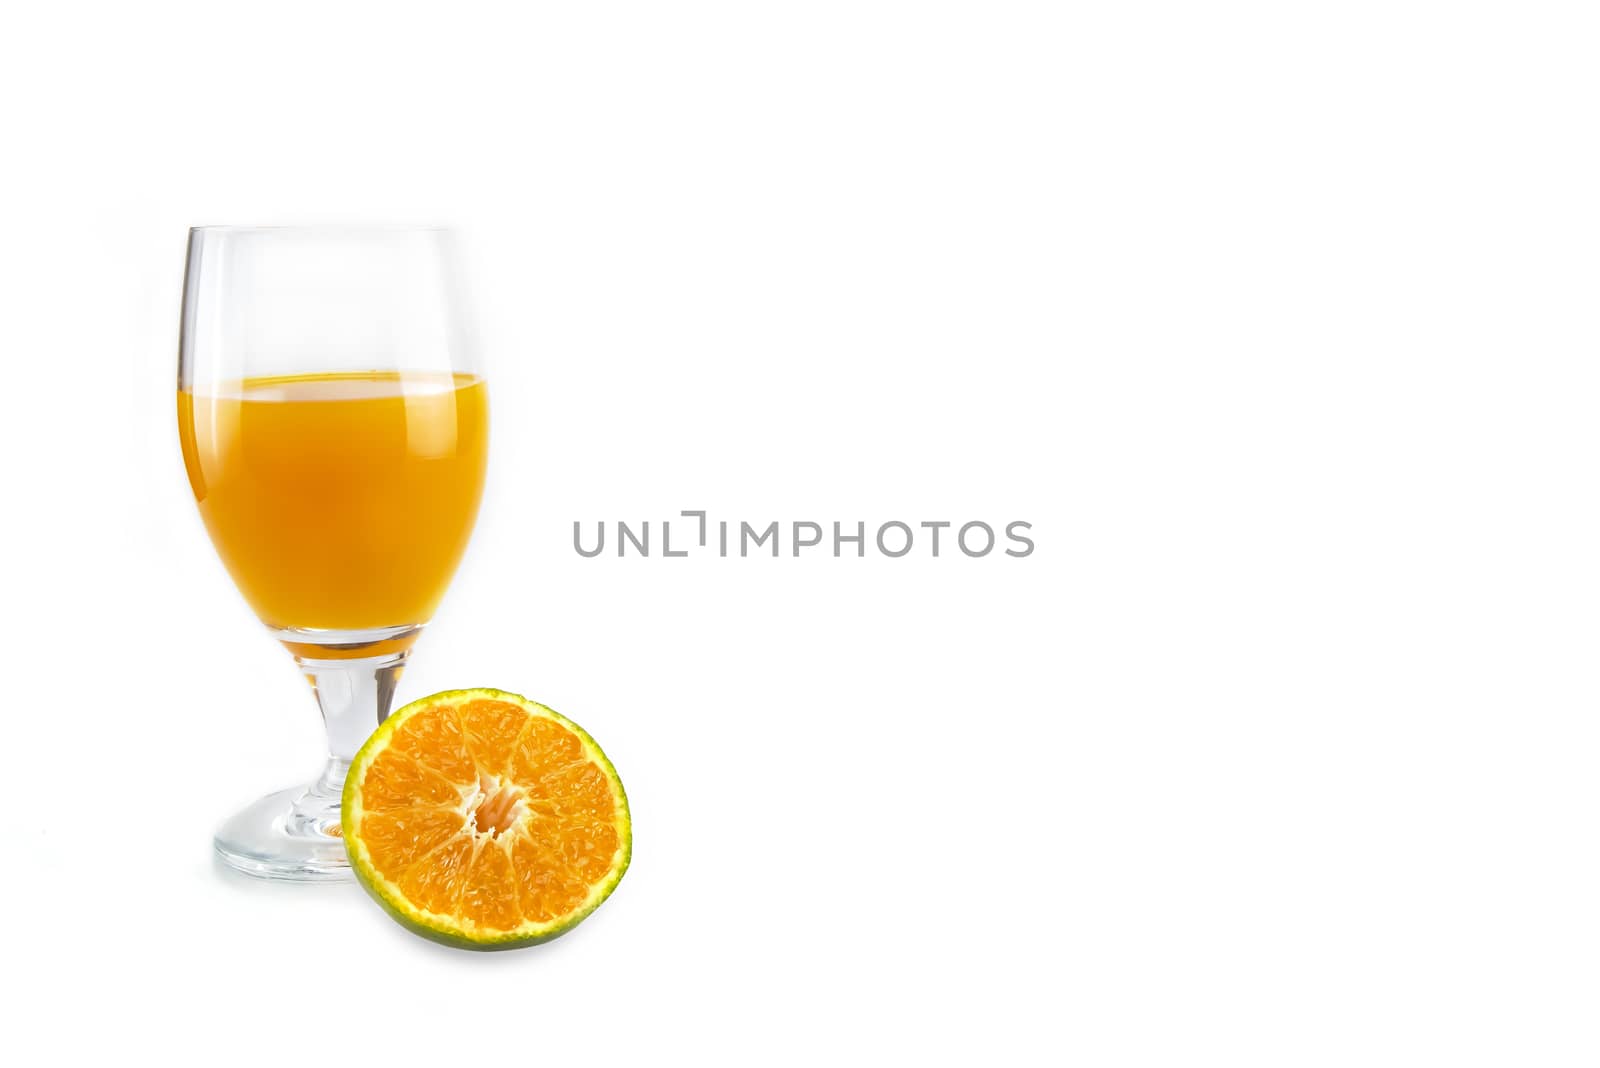 A glass of fresh orange juice with a slice of cut orange fruit placed in front of it. Isolated on white background.